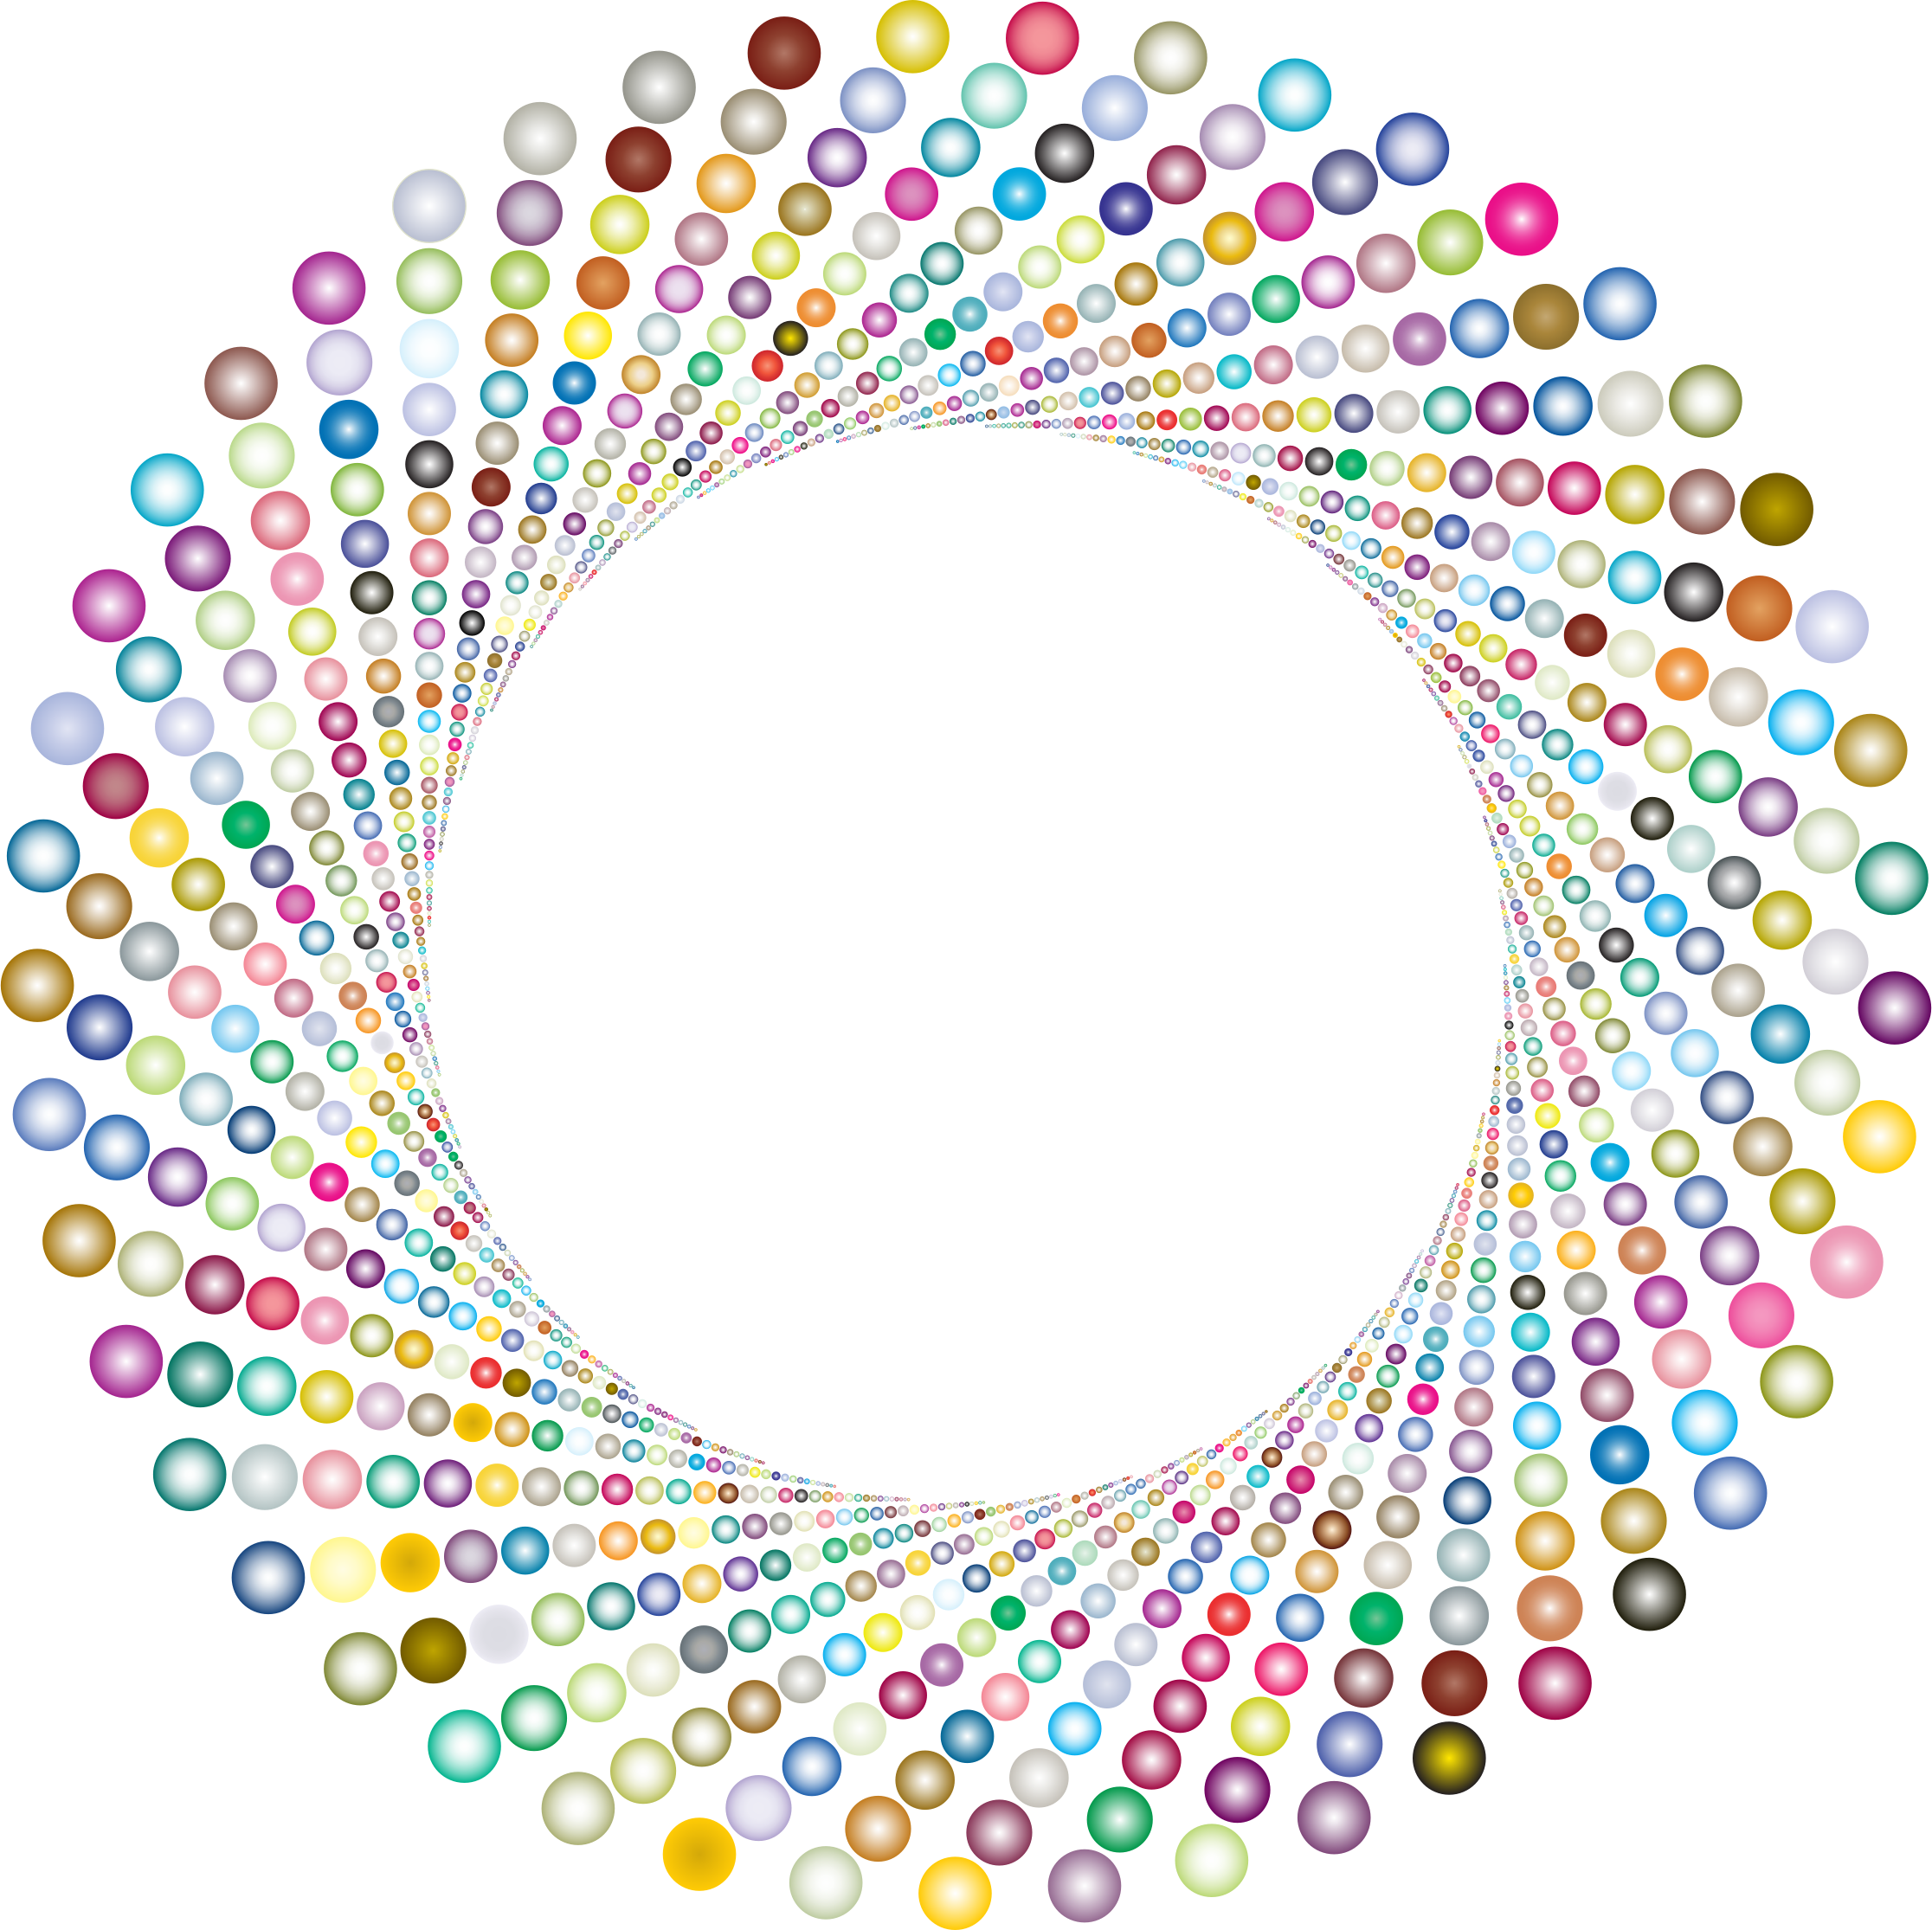 Circles shutter vortex big. Festival clipart colorful abstract